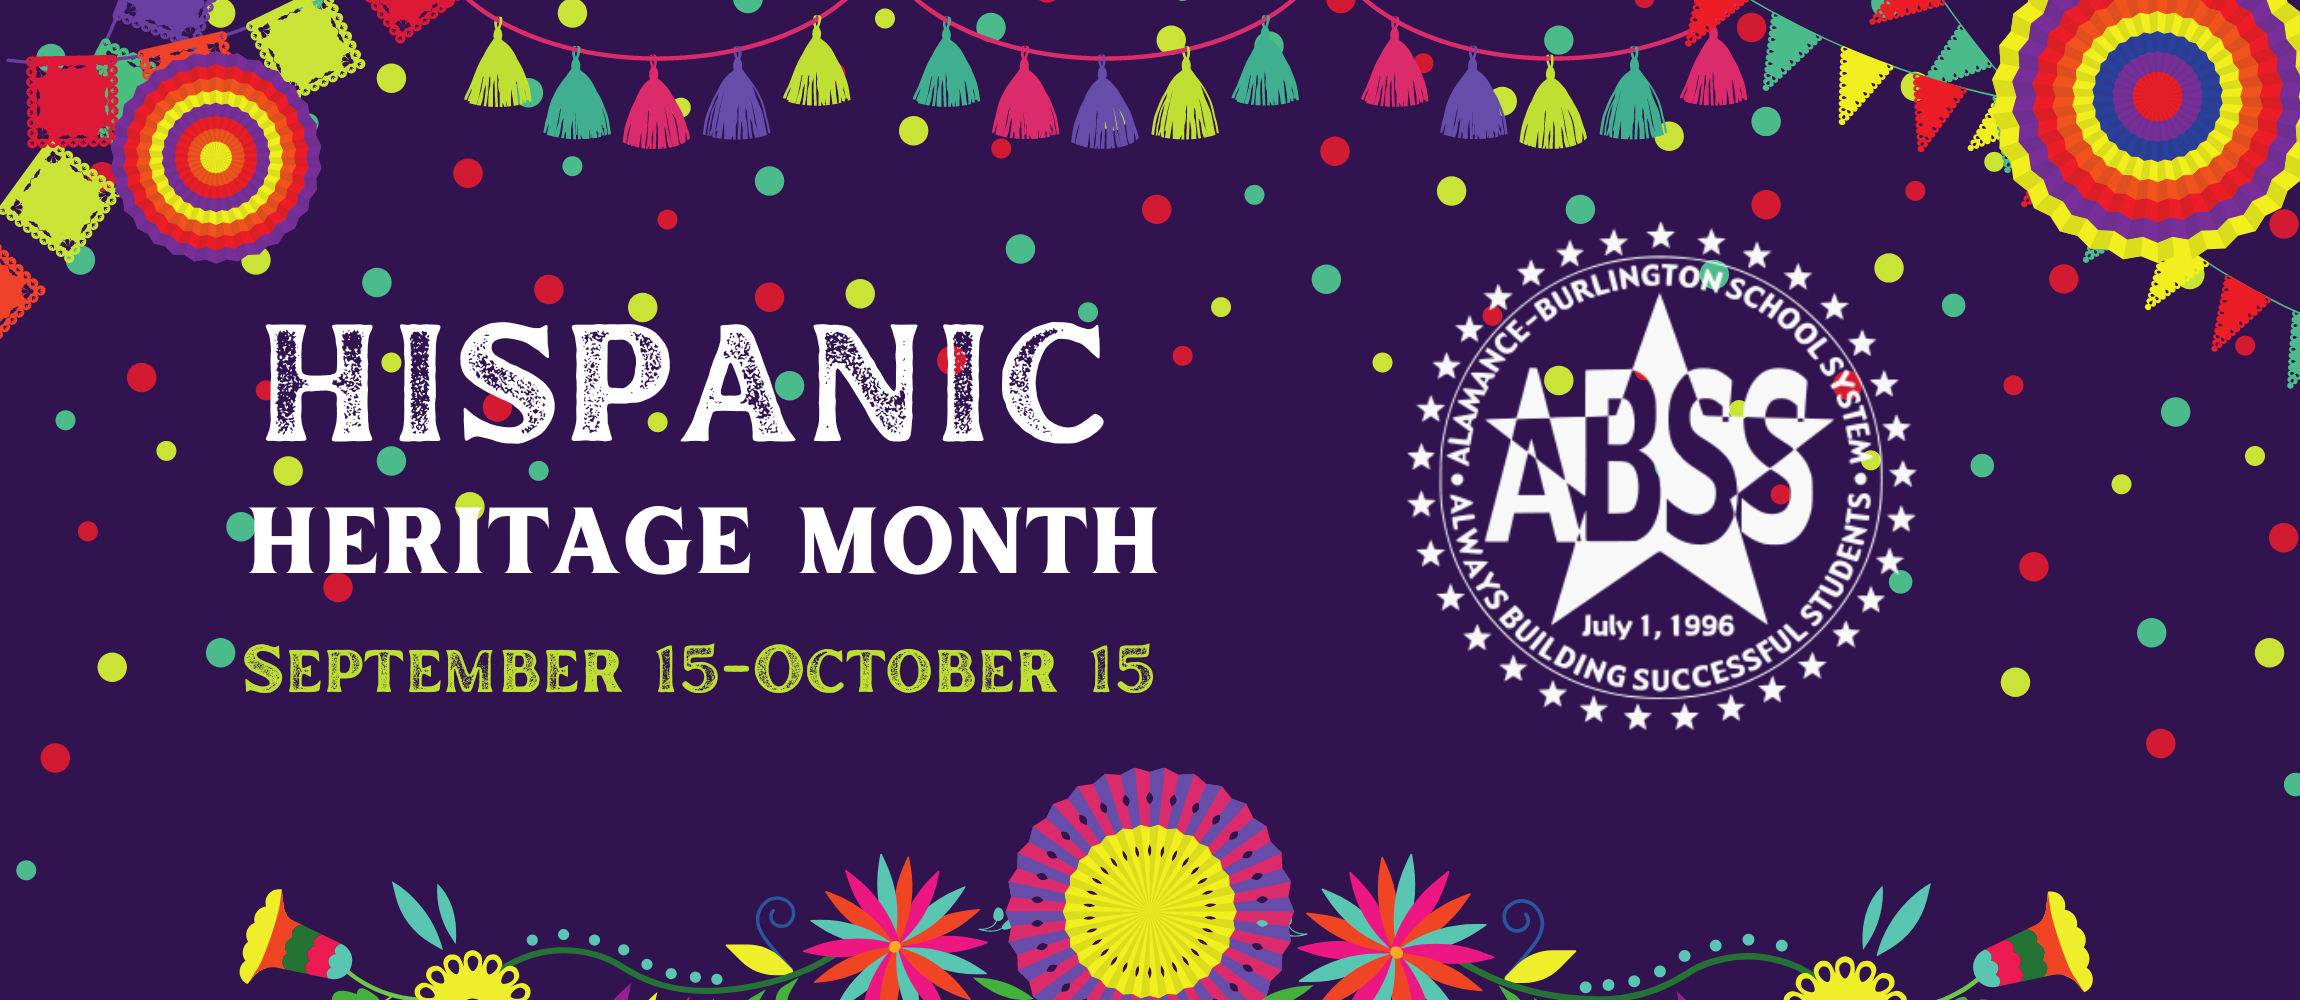 Hispanic Heritage Month banner with the dates September 15-October 15